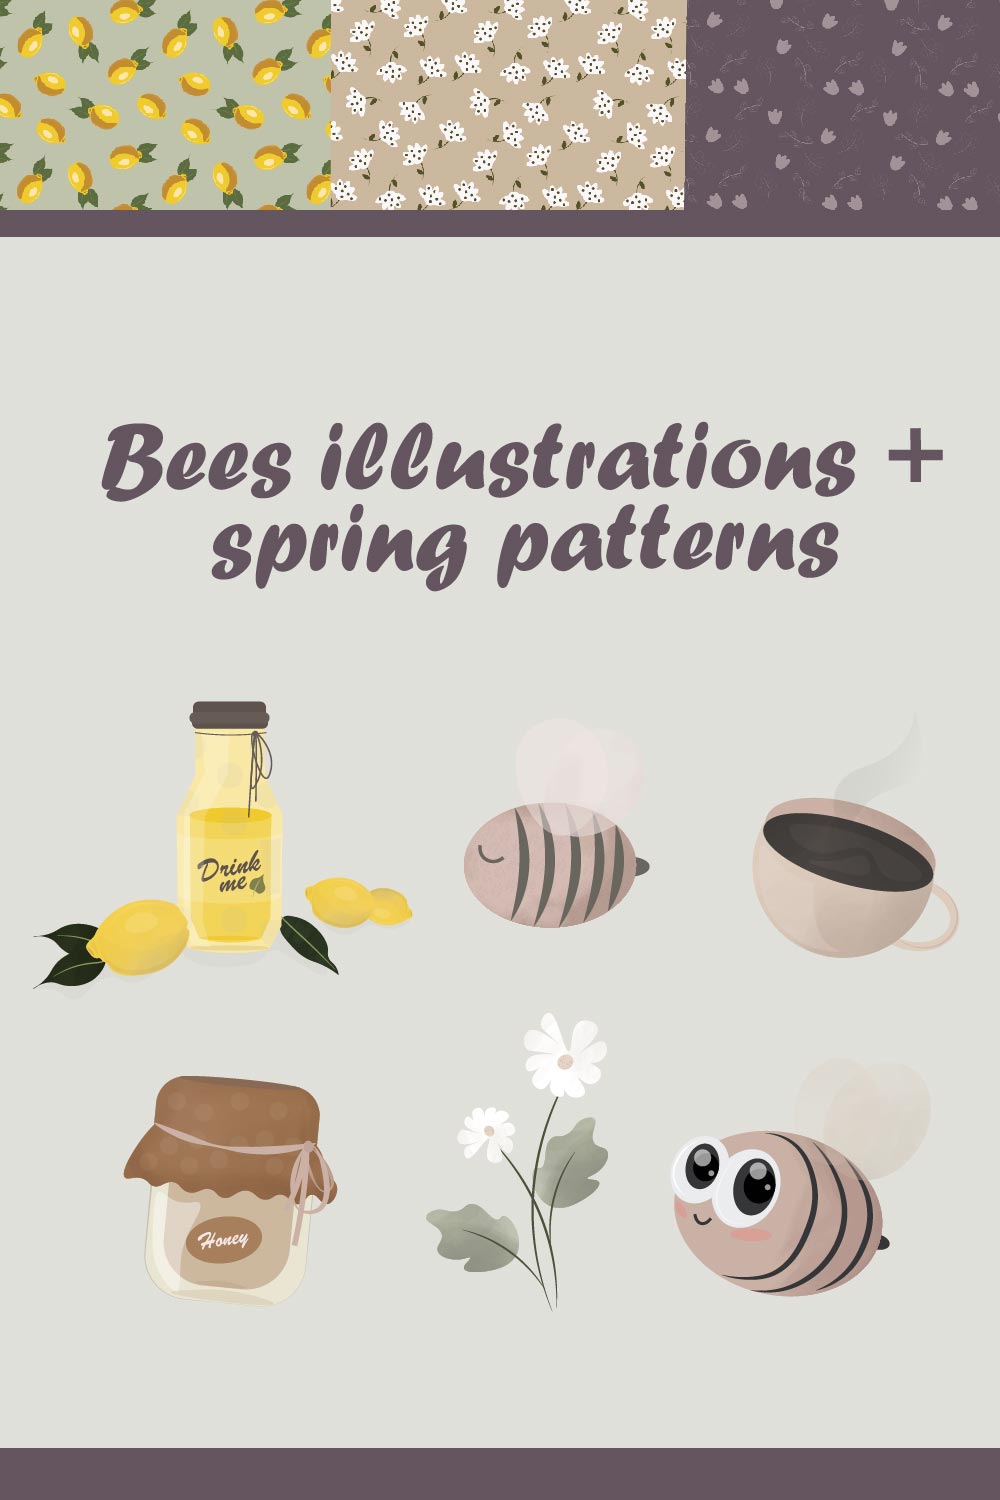 Bees Illustrations And Spring Patterns Pinterest Image.